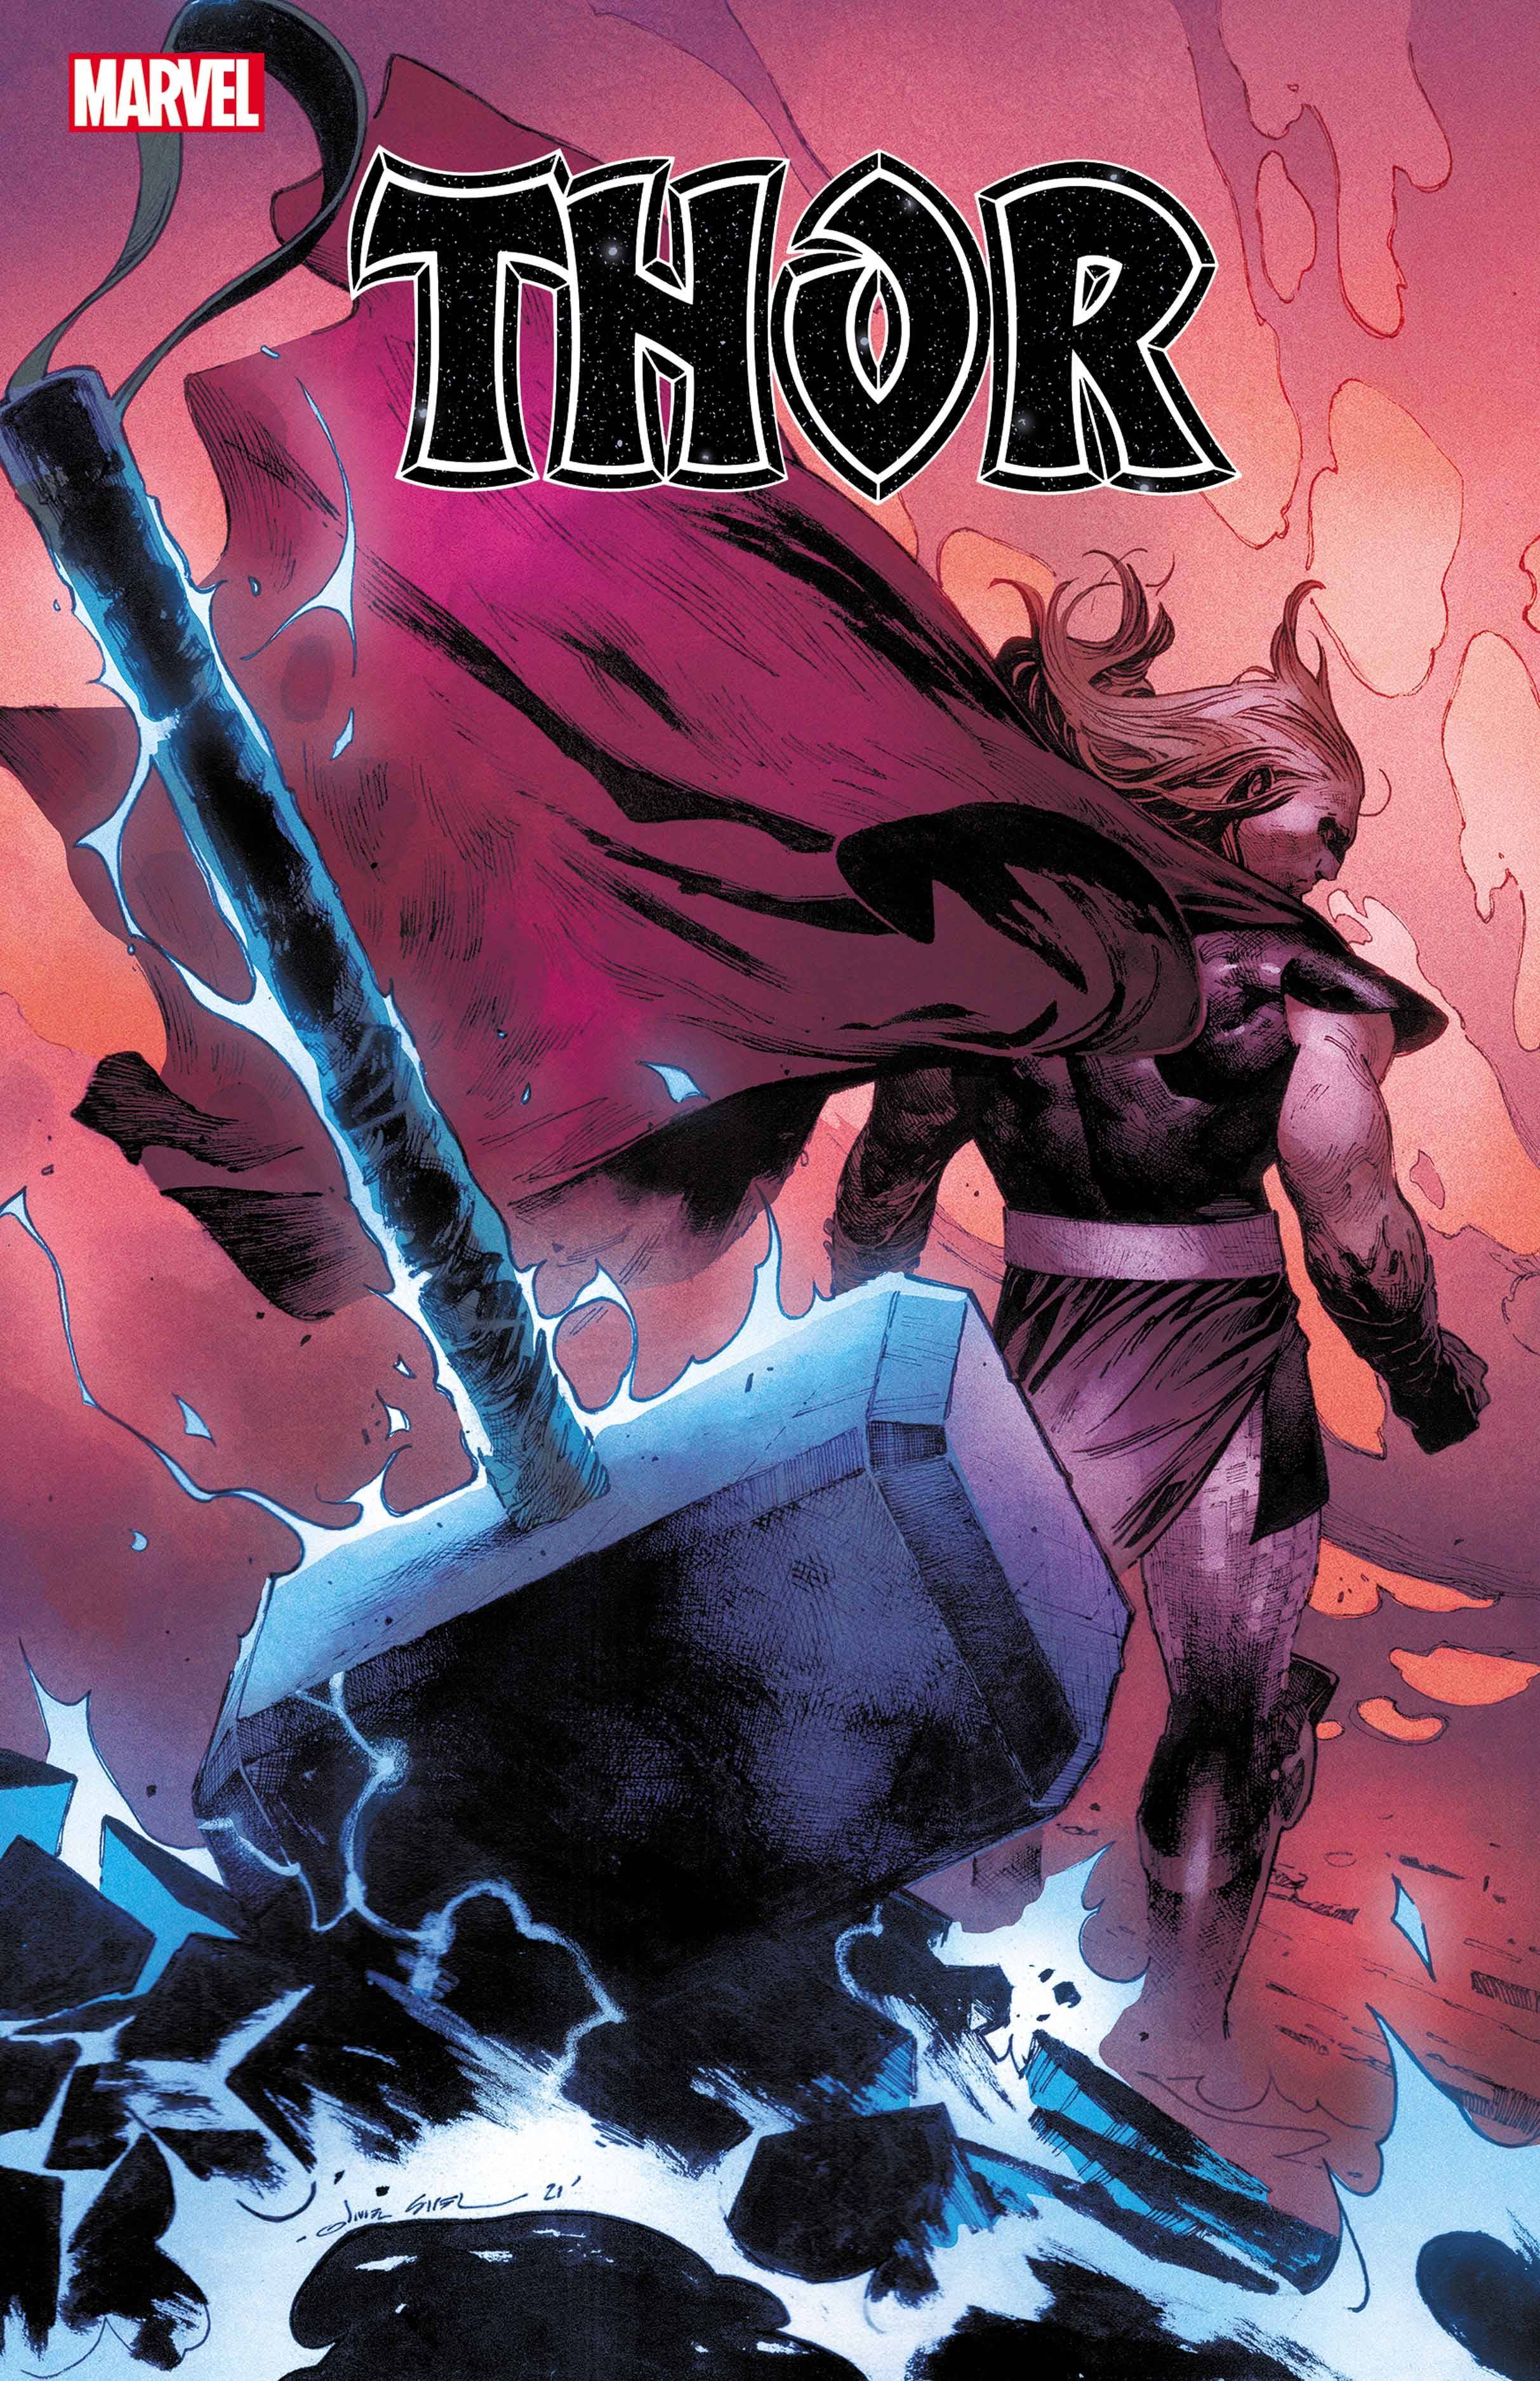 Photo of Thor Issue 17 comic sold by Stronghold Collectibles